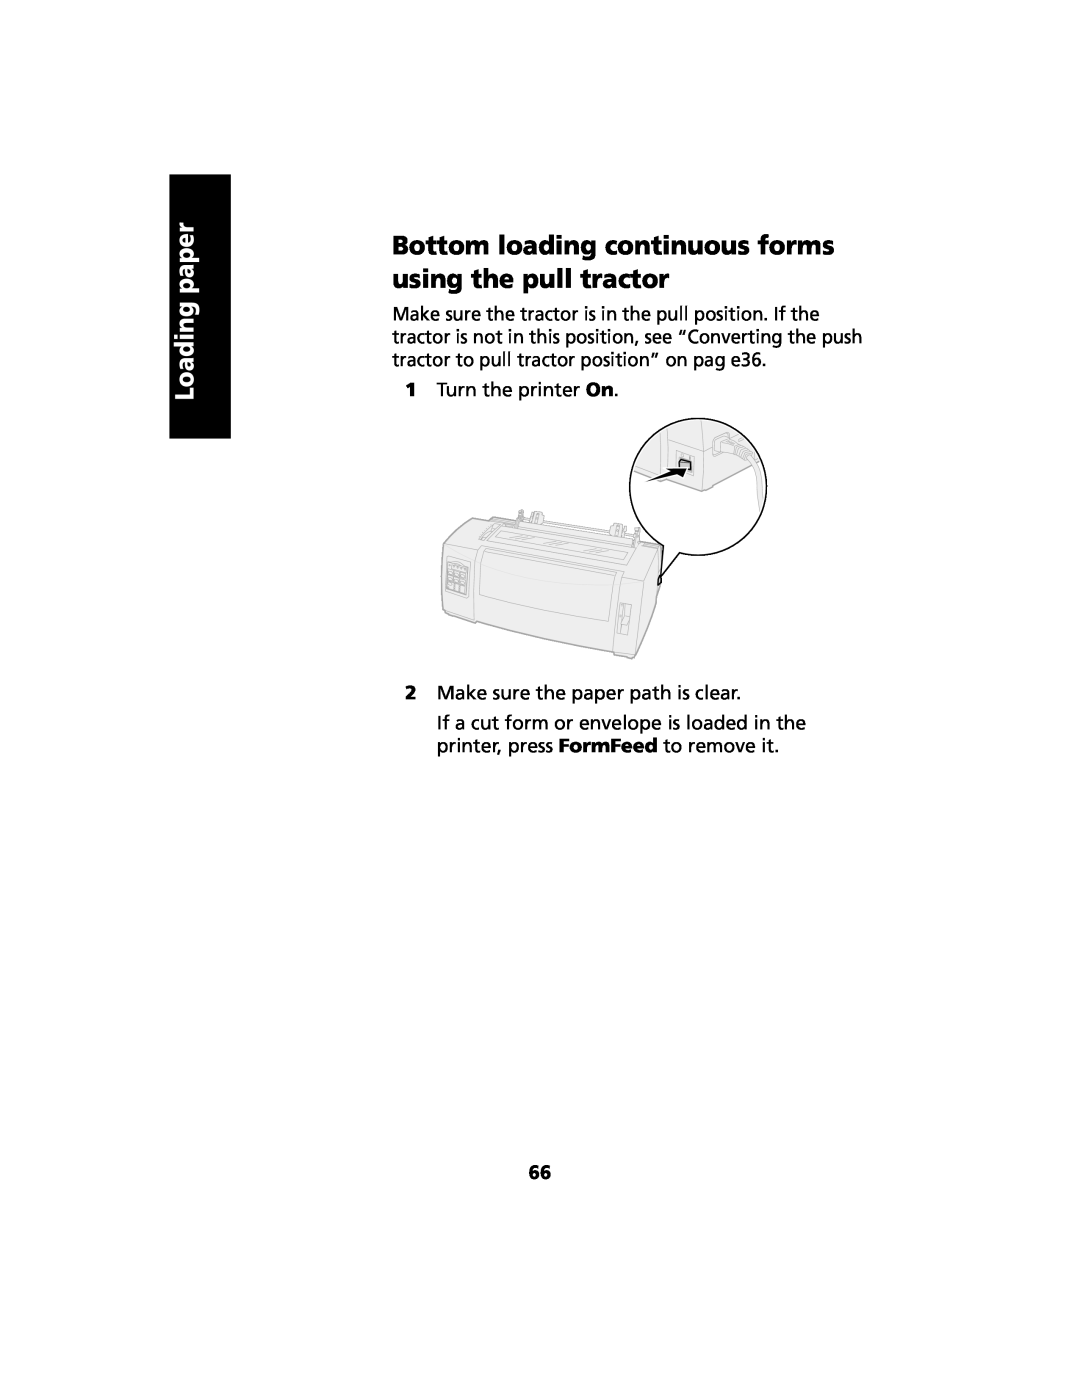 Lexmark 2480 manual Bottom loading continuous forms using the pull tractor, Loading paper 